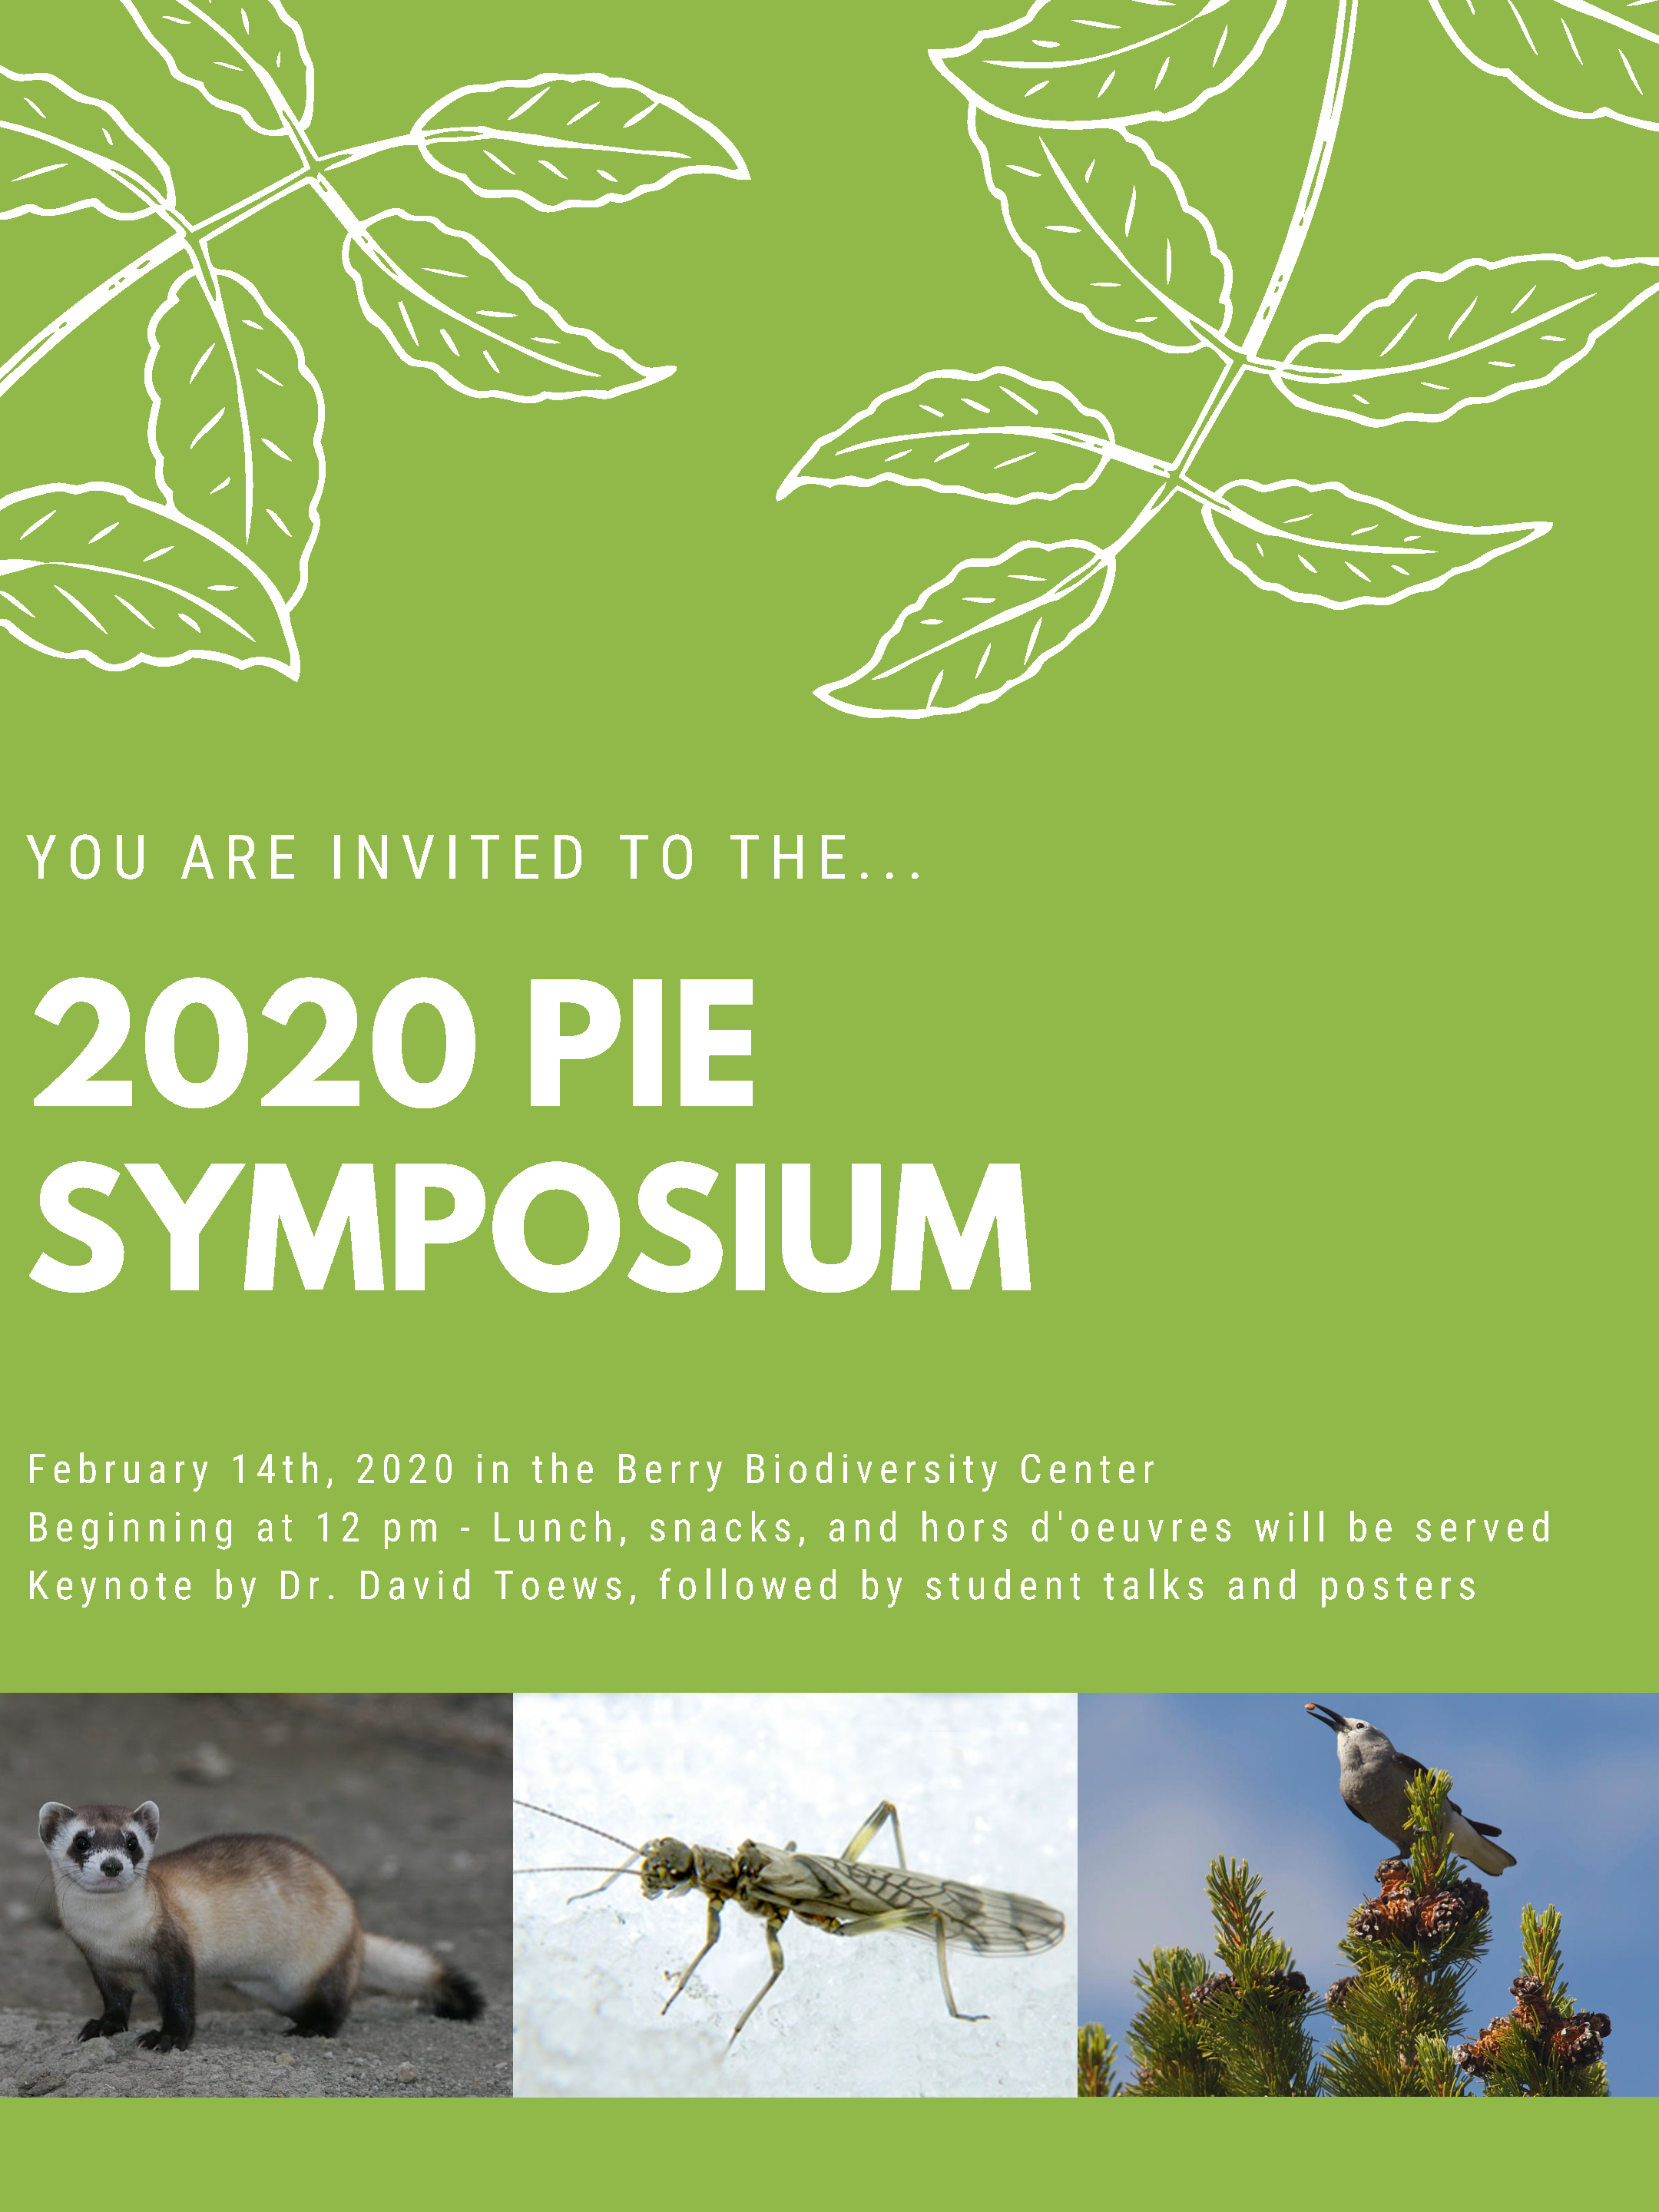 A poster inviting you to the 2020 PiE Symposium on February 14th, 2020 in the Berry Biodiversity Center